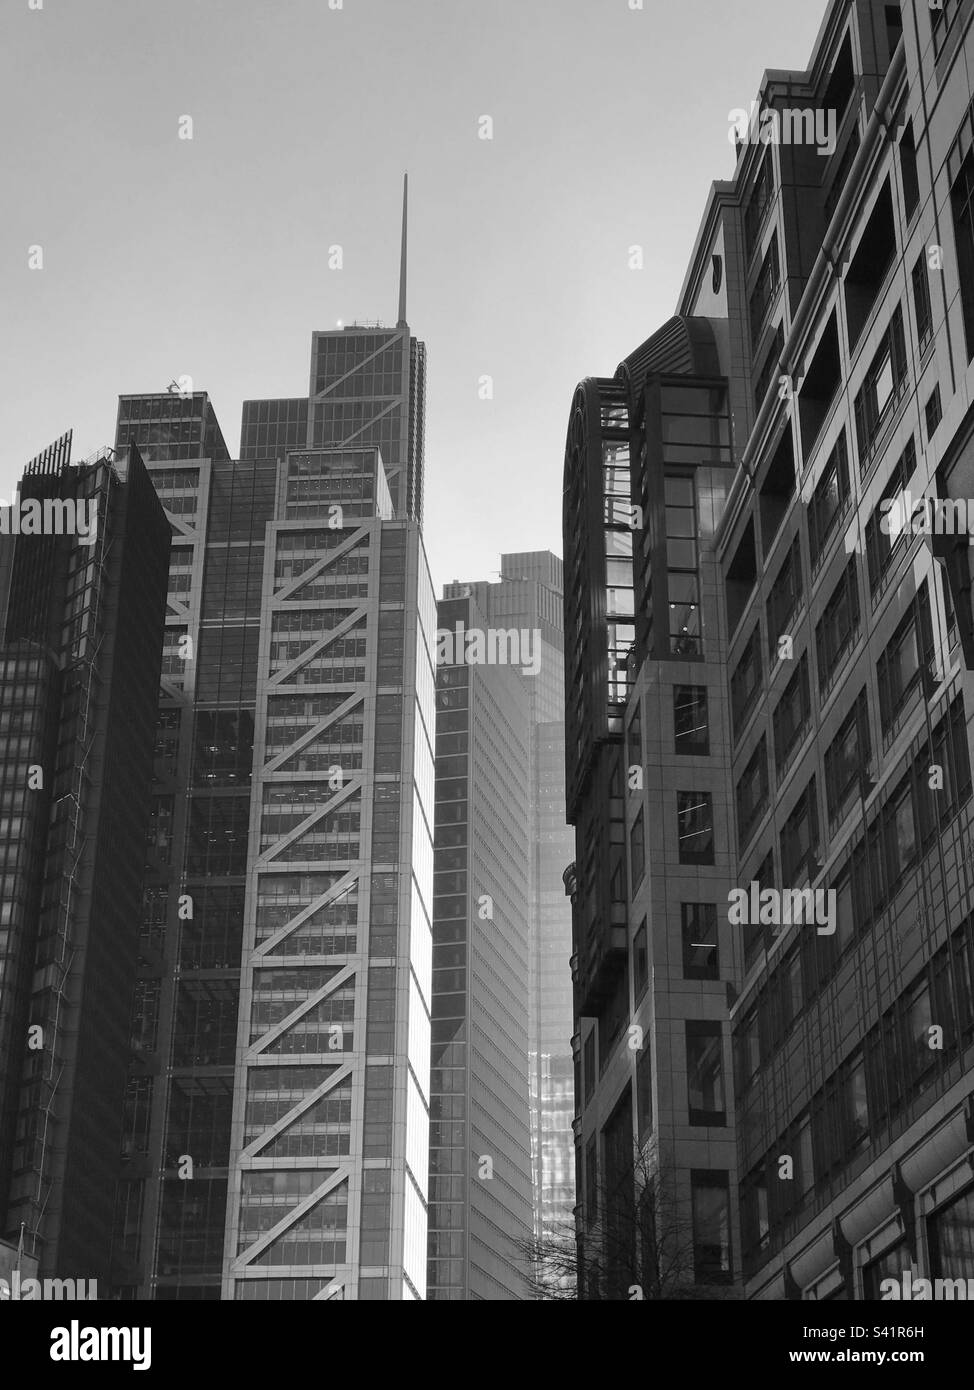 A black and white image of buildings in the financial district of Bishopsgate, London Stock Photo